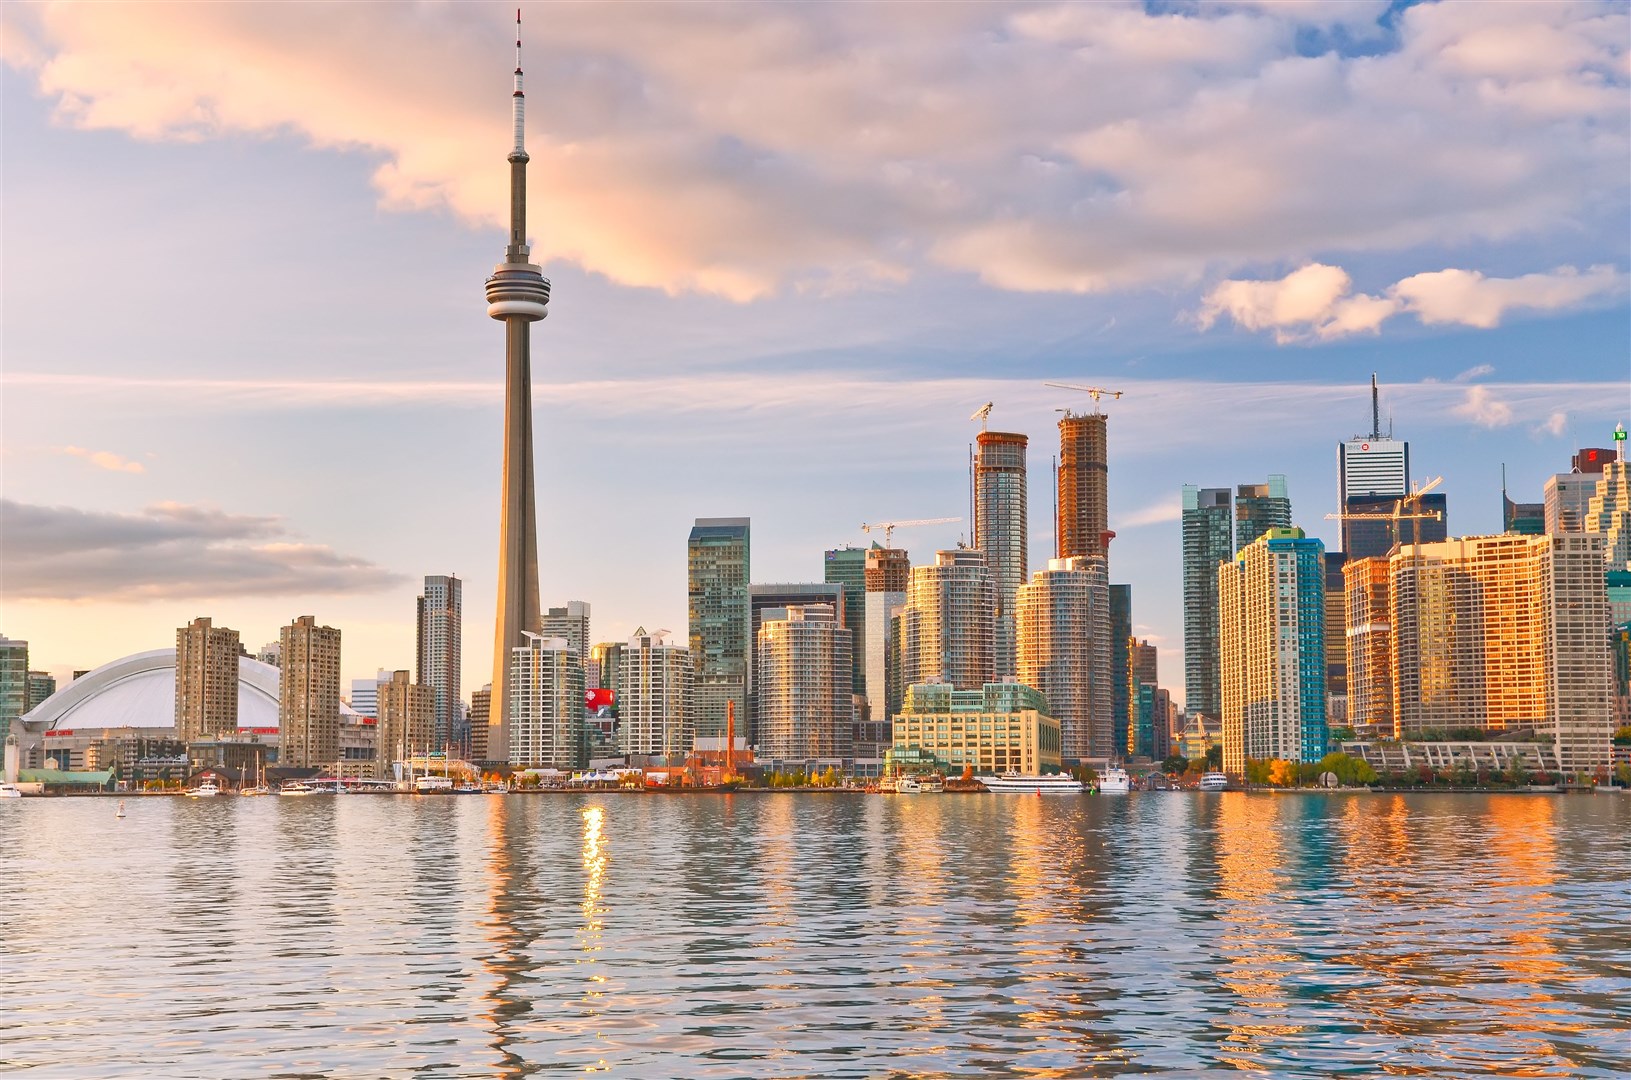 The Canadian market including Toronto was worth £8.2 billion in exports to the UK in 2016.